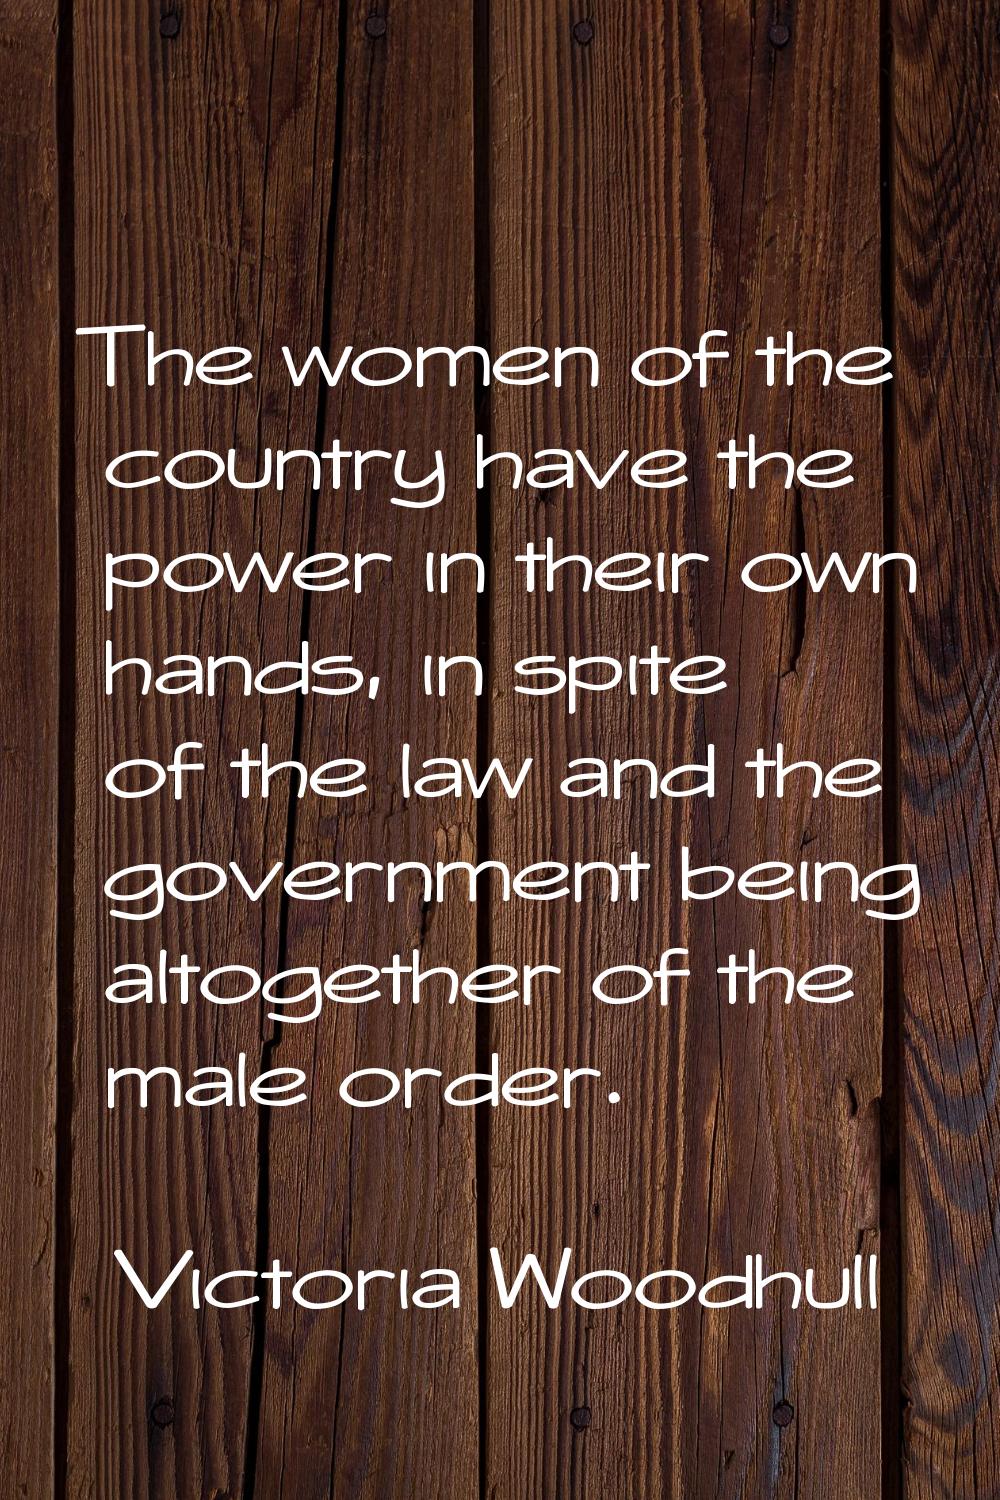 The women of the country have the power in their own hands, in spite of the law and the government 